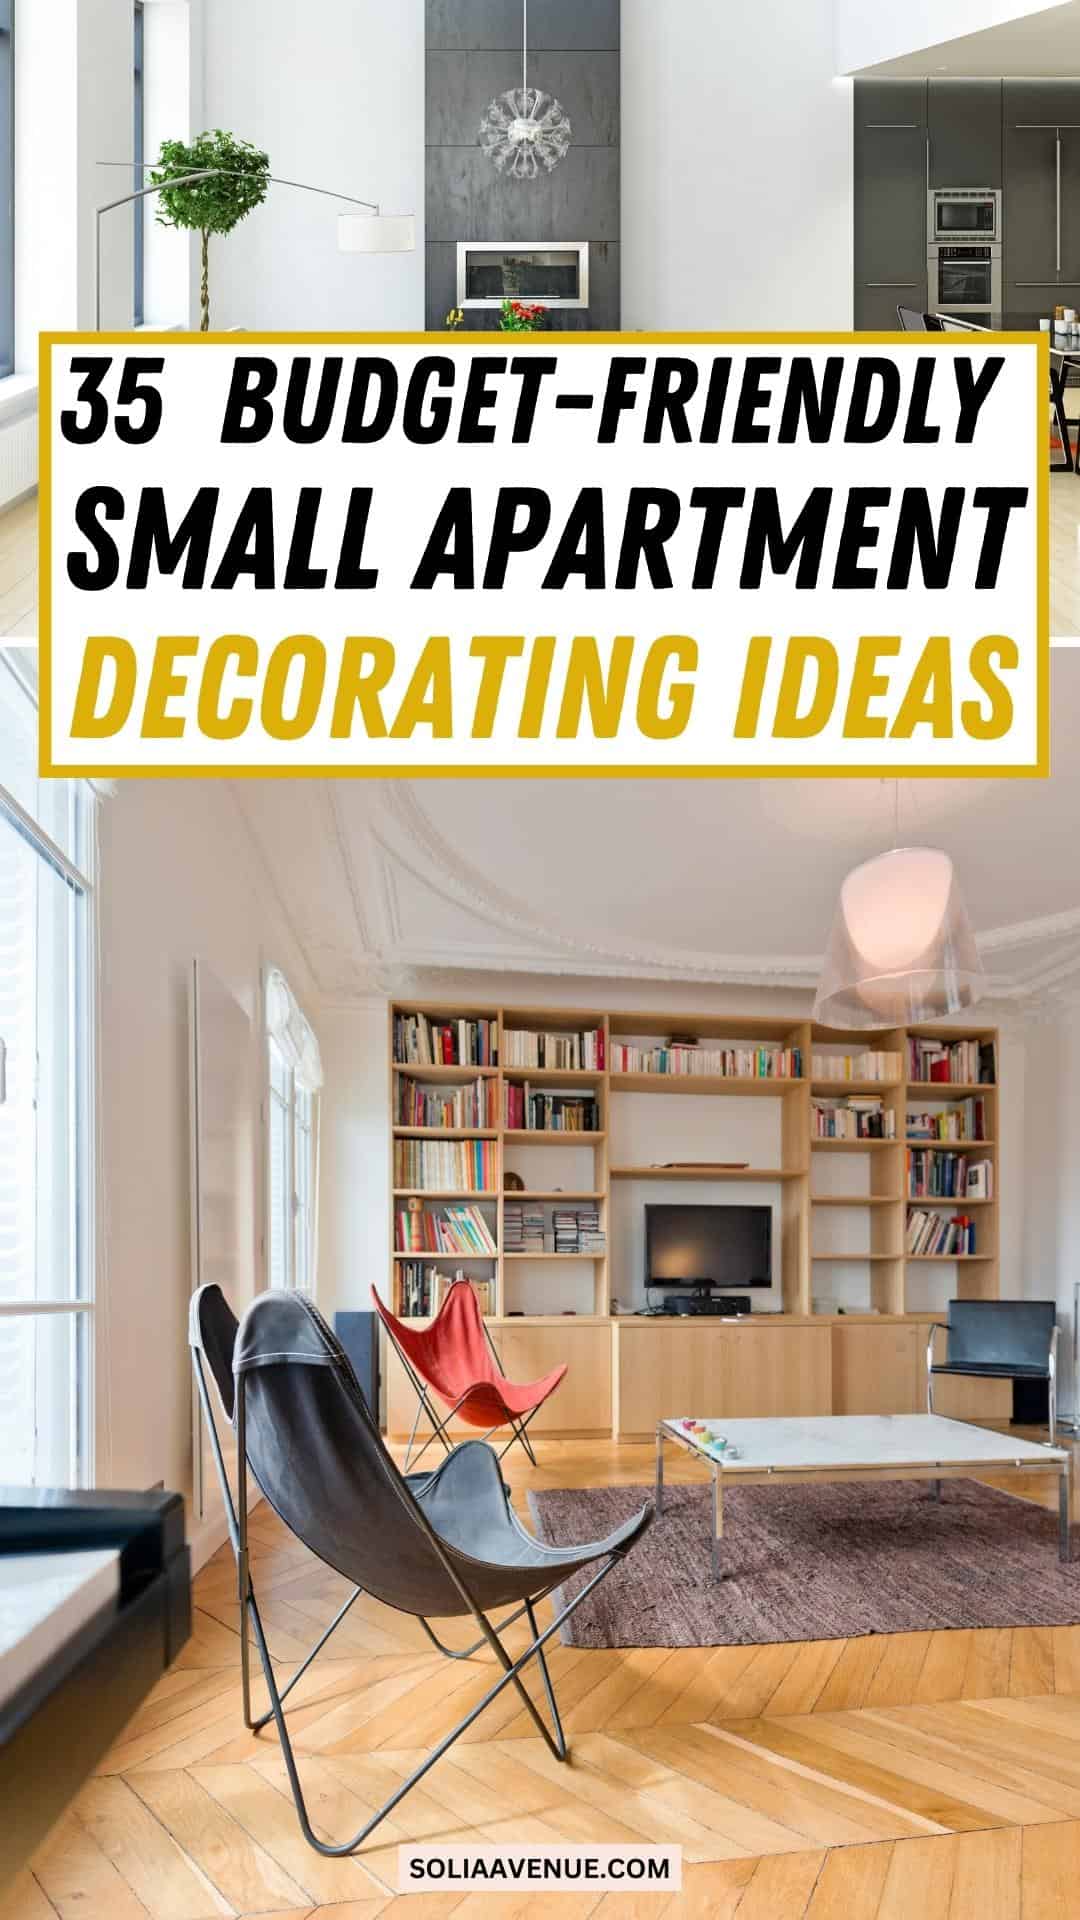 Discover 35+ creative small apartment decorating ideas. Maximize space, add style, and create a functional home with these expert tips.